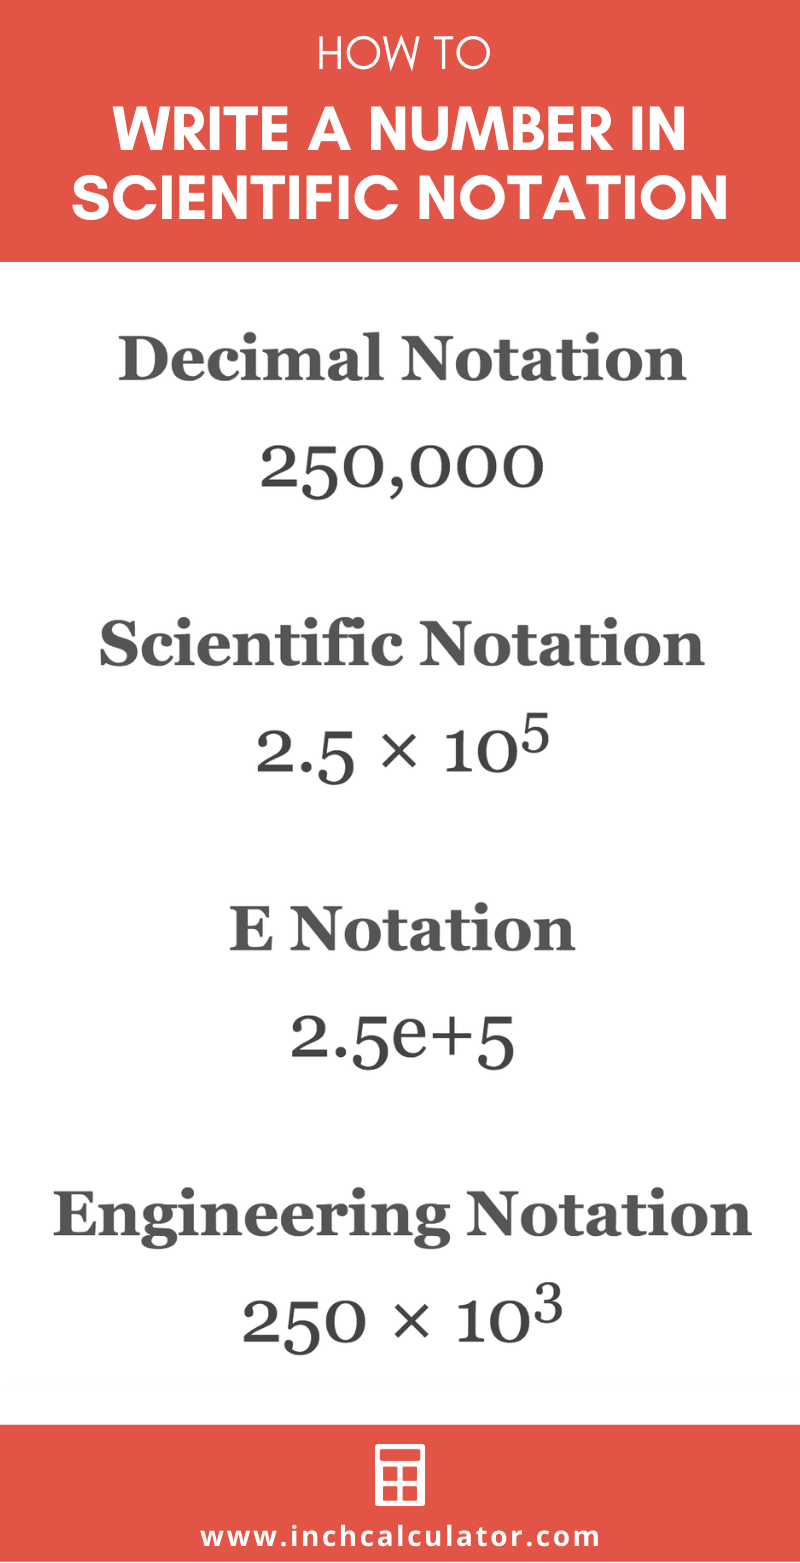 Share scientific notation calculator and converter